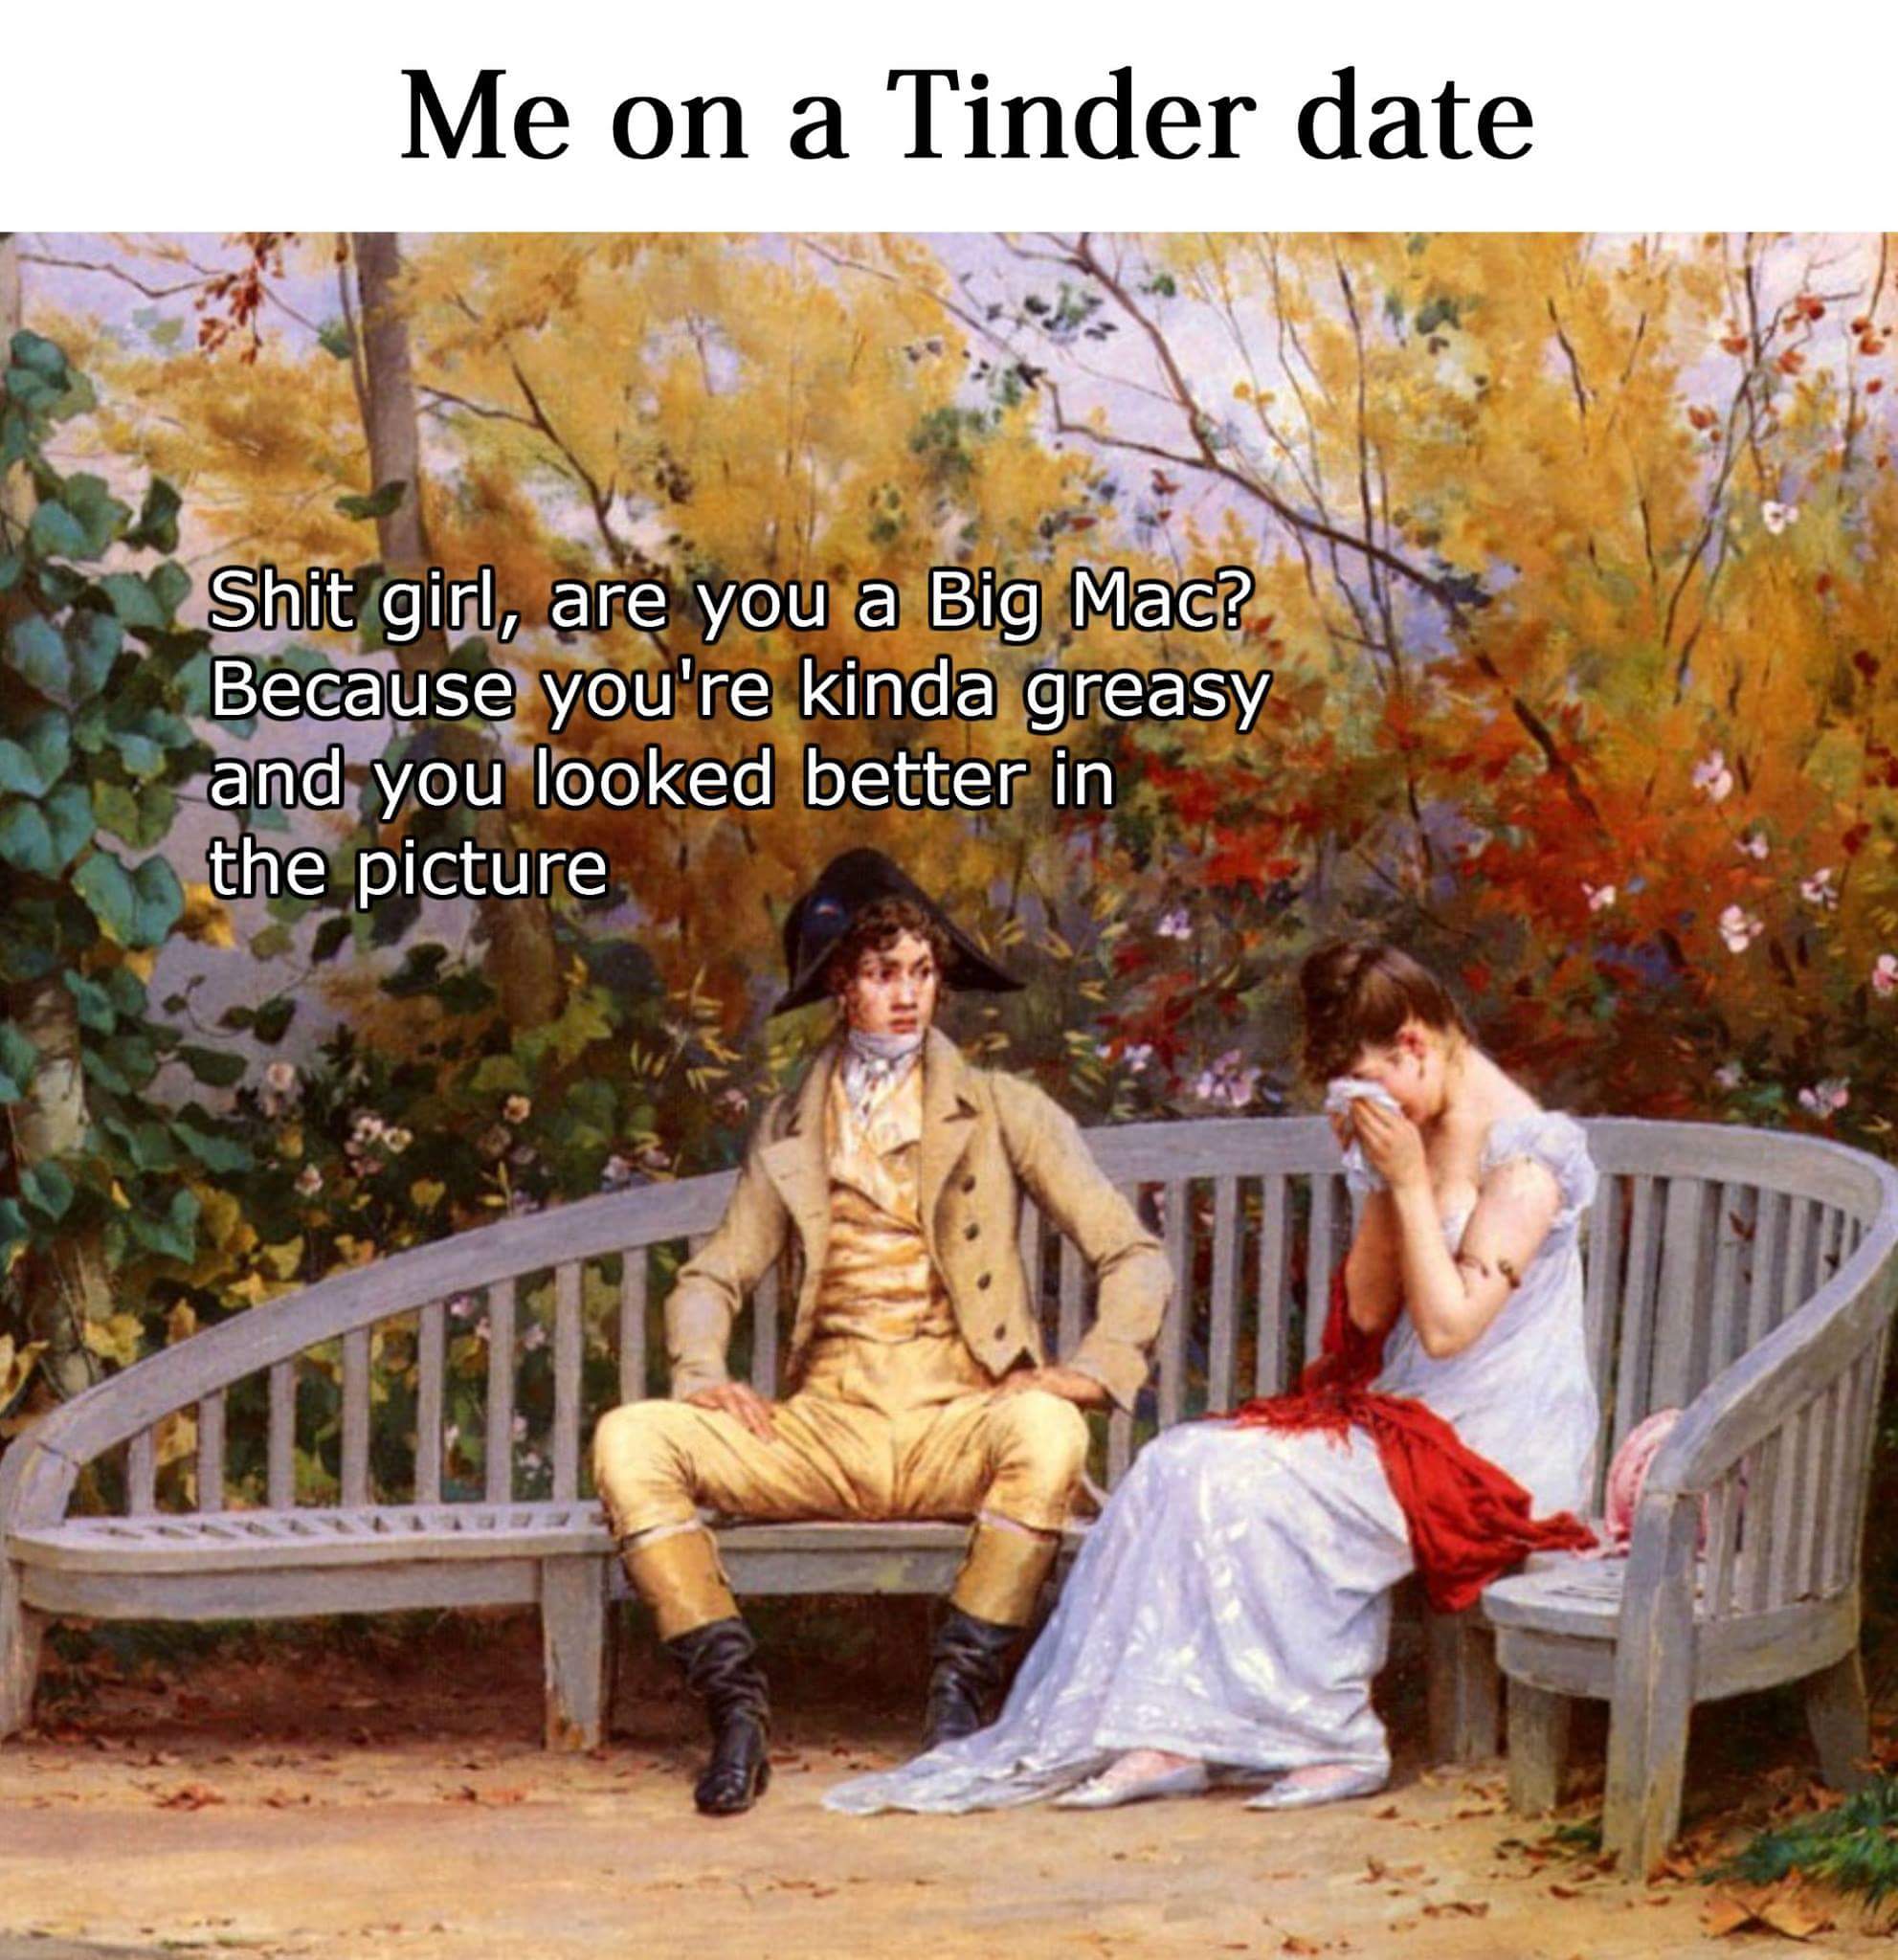 classic art memes - Me on a Tinder date Shit girl, are you a Big Mac? Because you're kinda greasy and you looked better in the picture